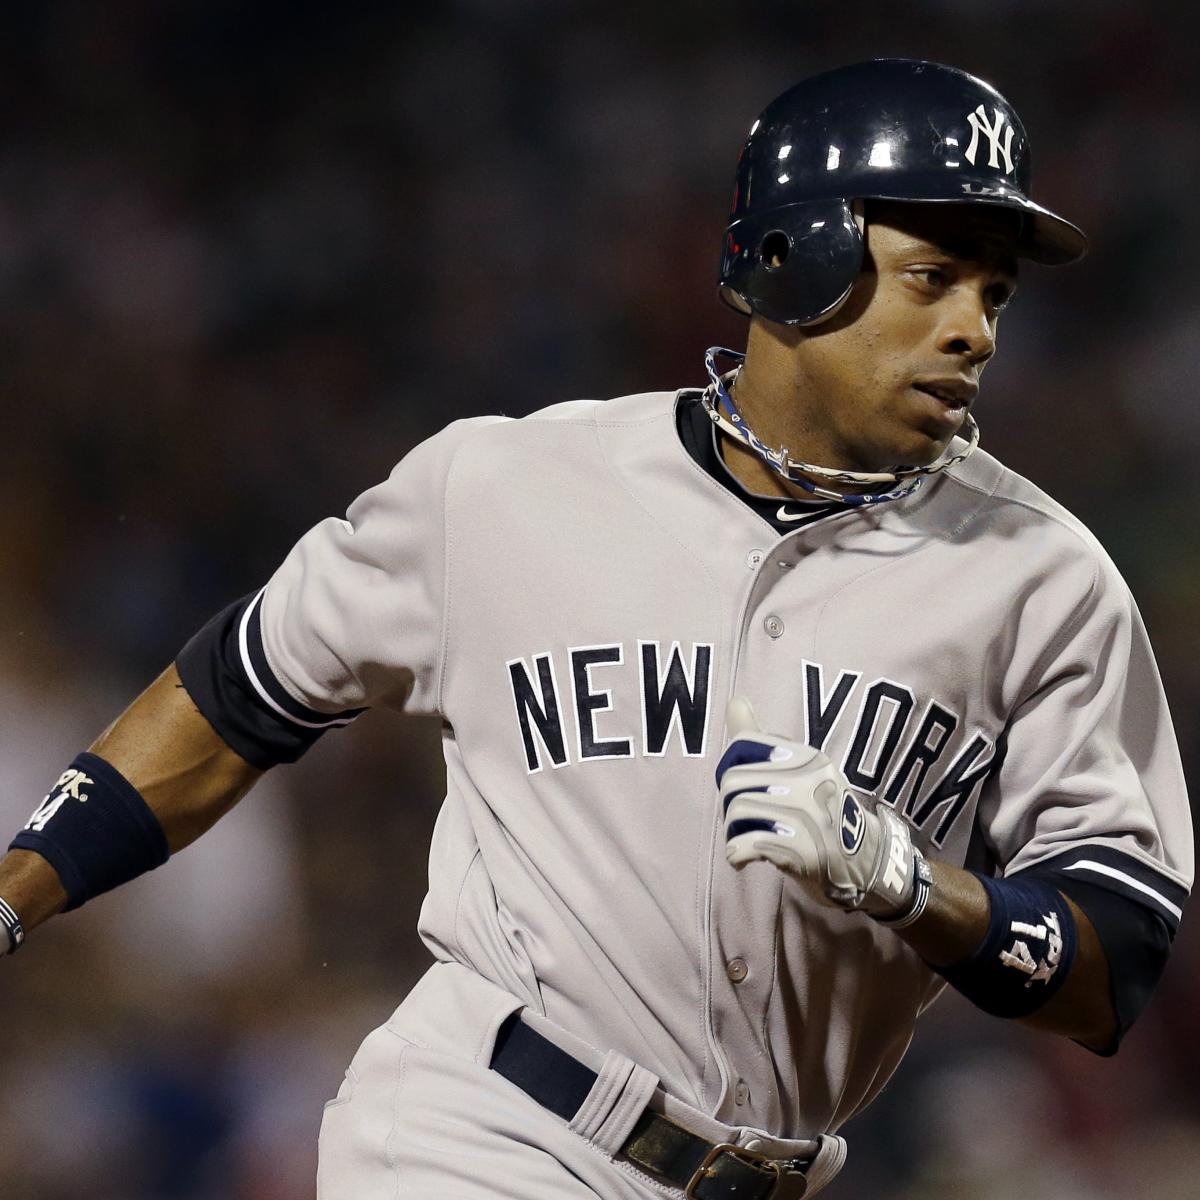 Curtis Granderson among Met, Yankee players going pink for moms